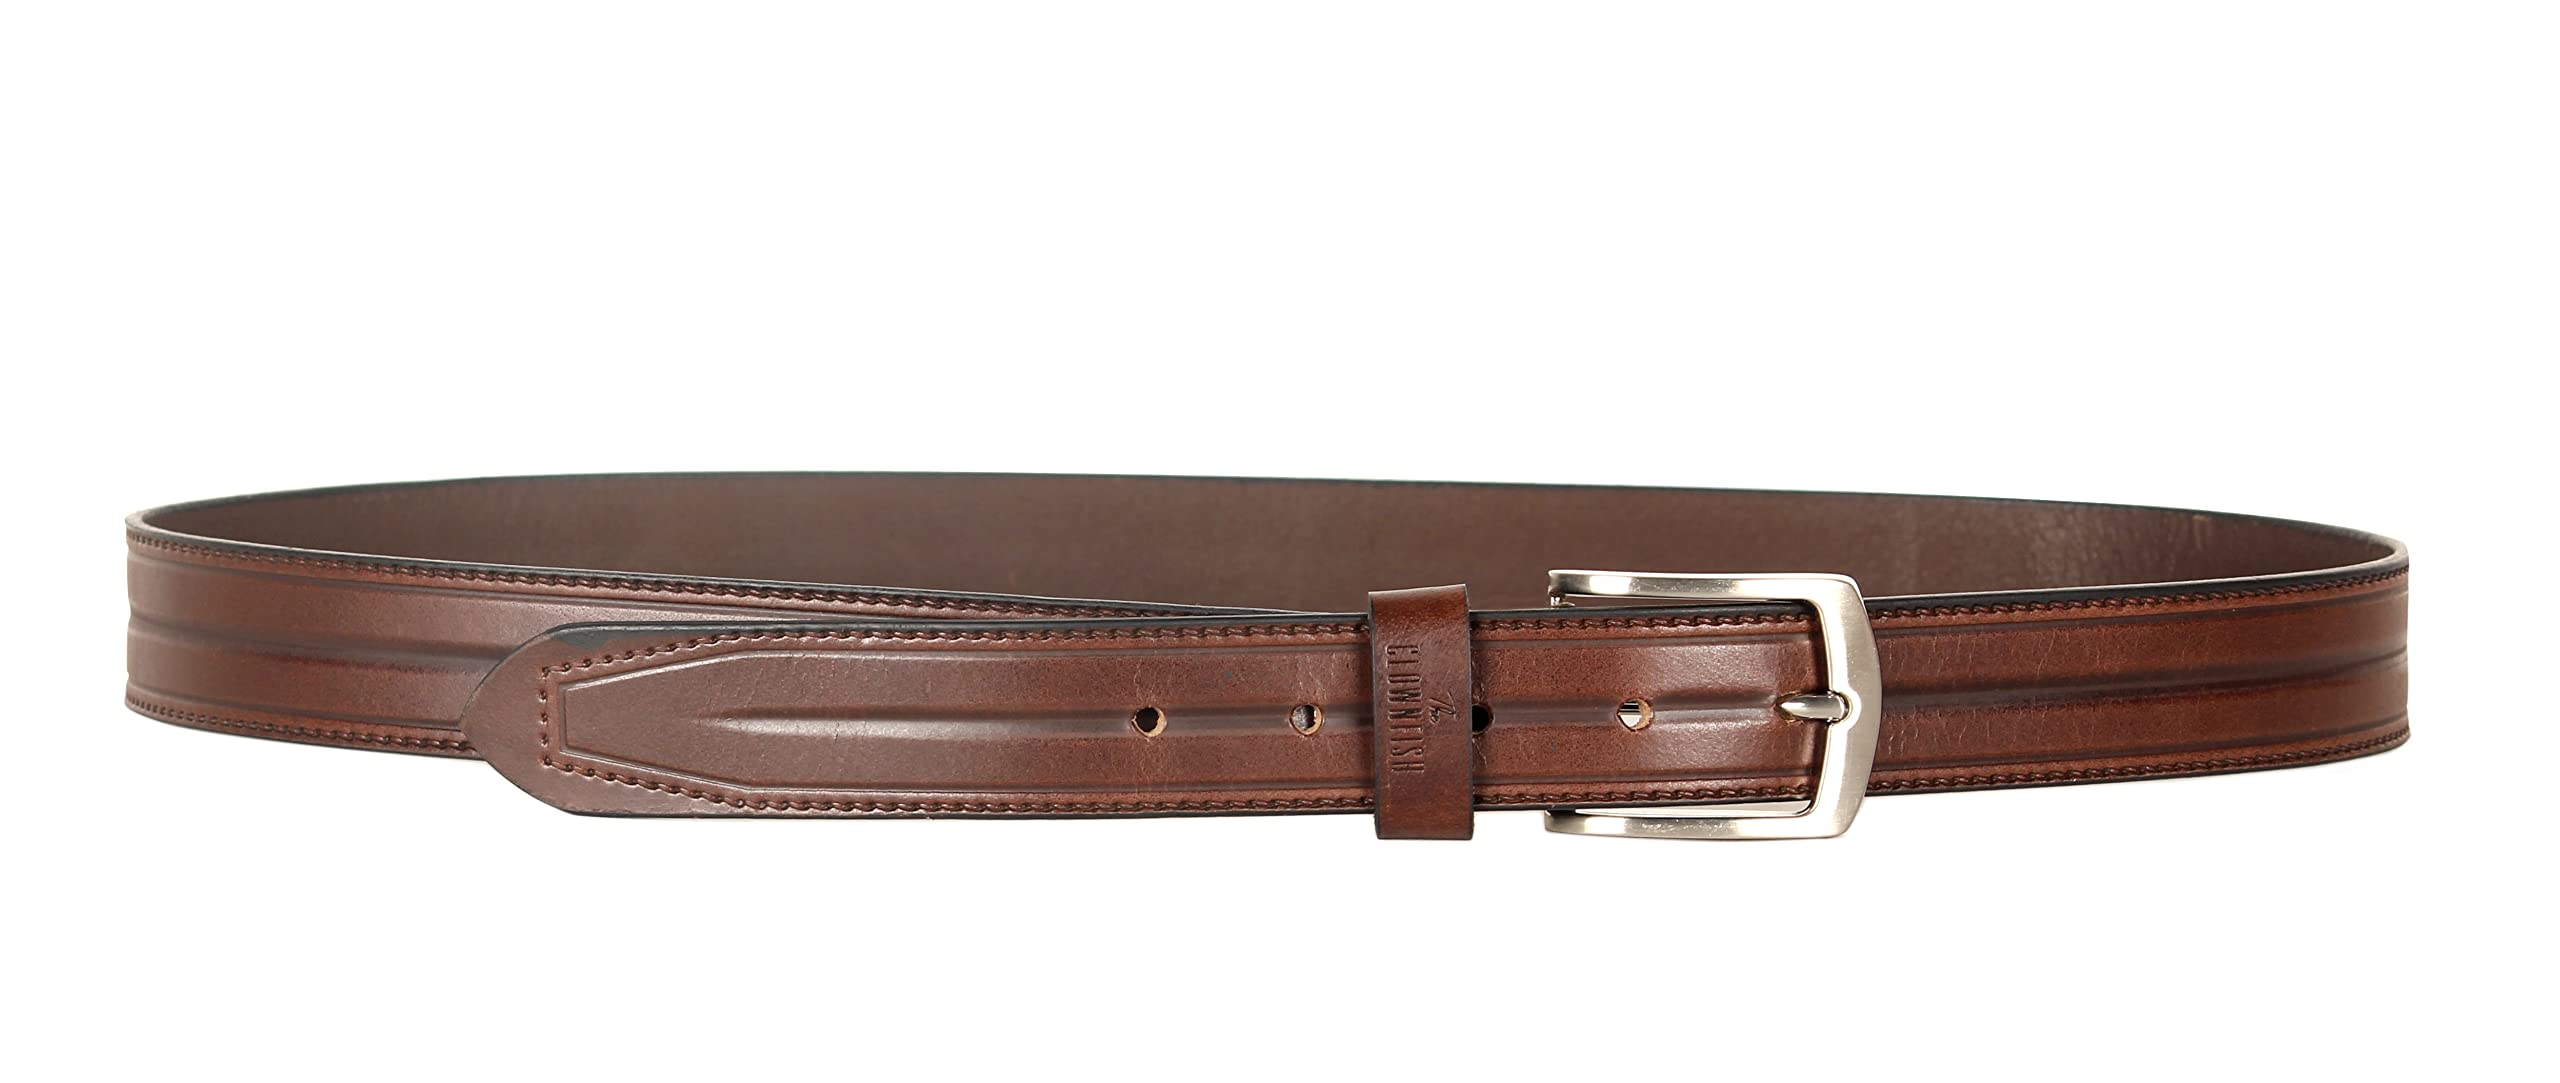 THE CLOWNFISH Men's Genuine Leather Belt with Textured/Embossed Design-Chocolate Brown (Size-32 inches)